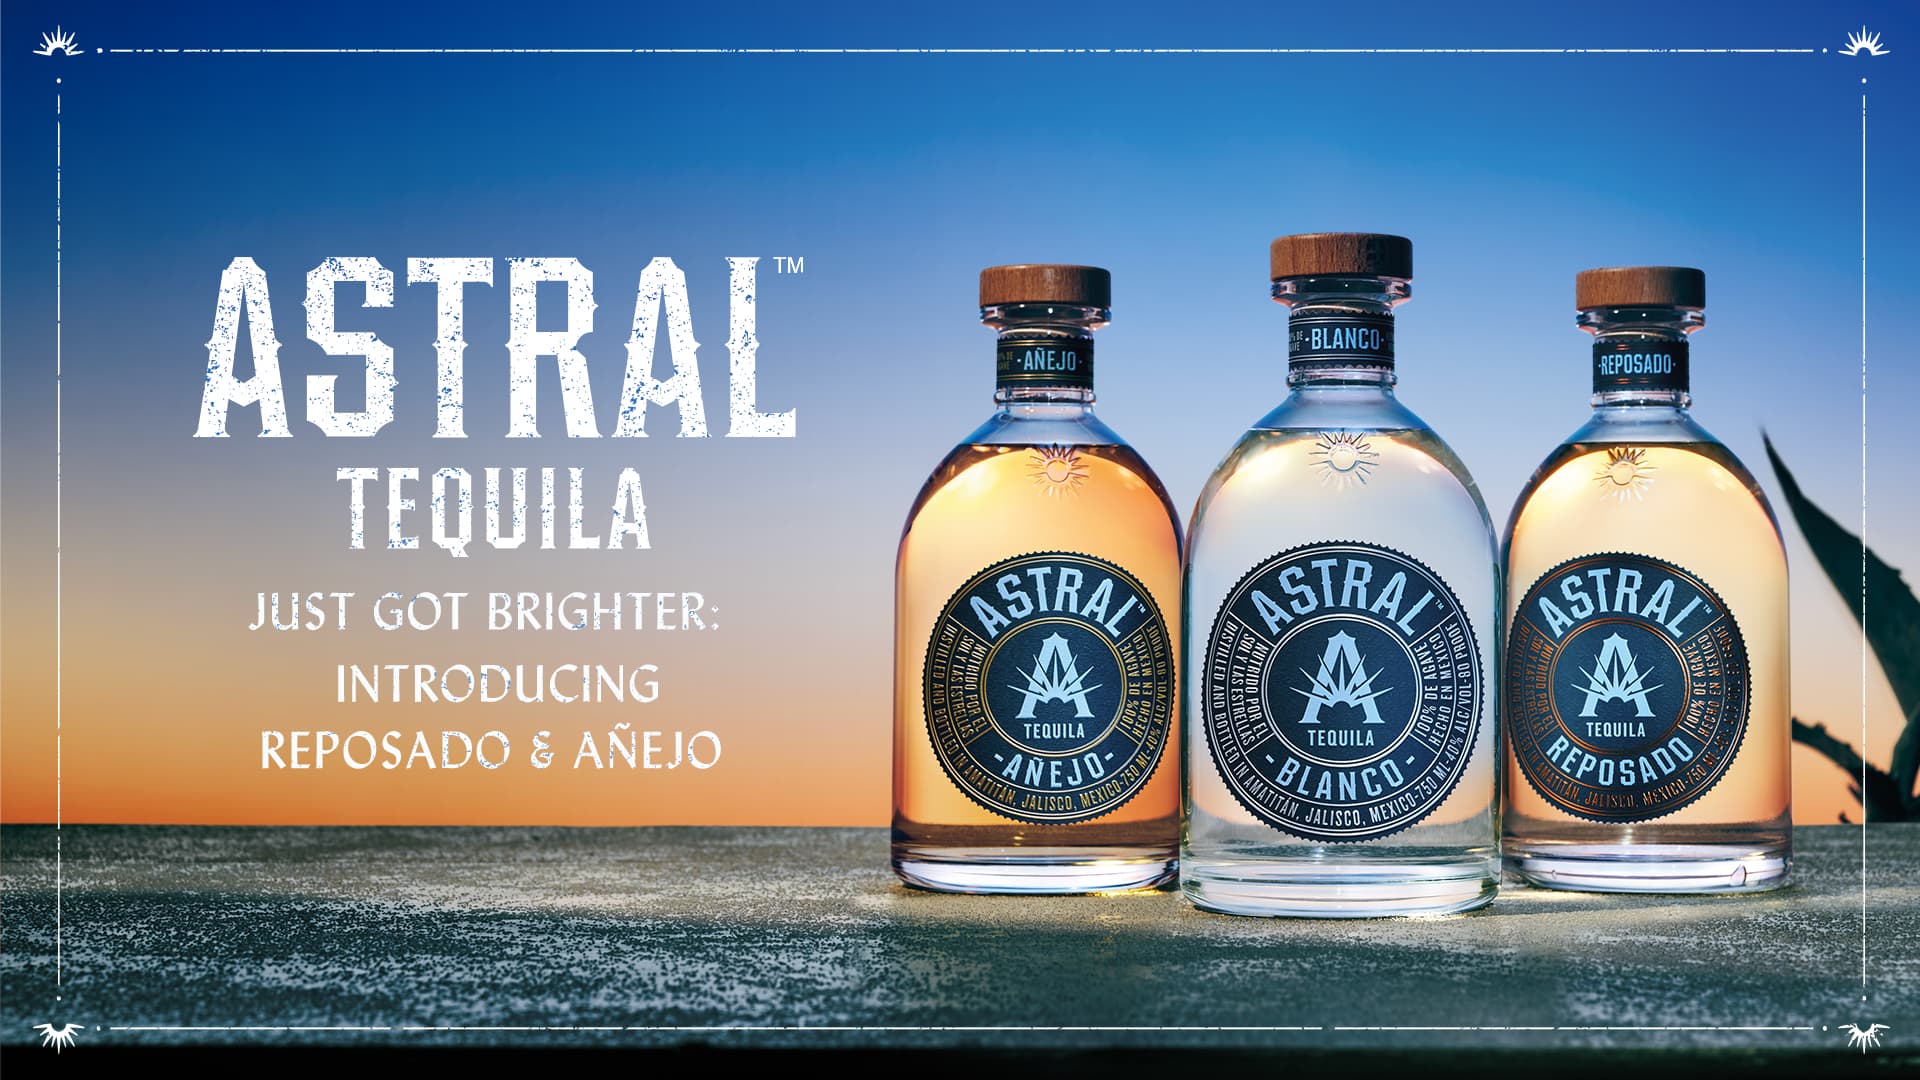 Astral Tequila now available in Reposado and Añejo